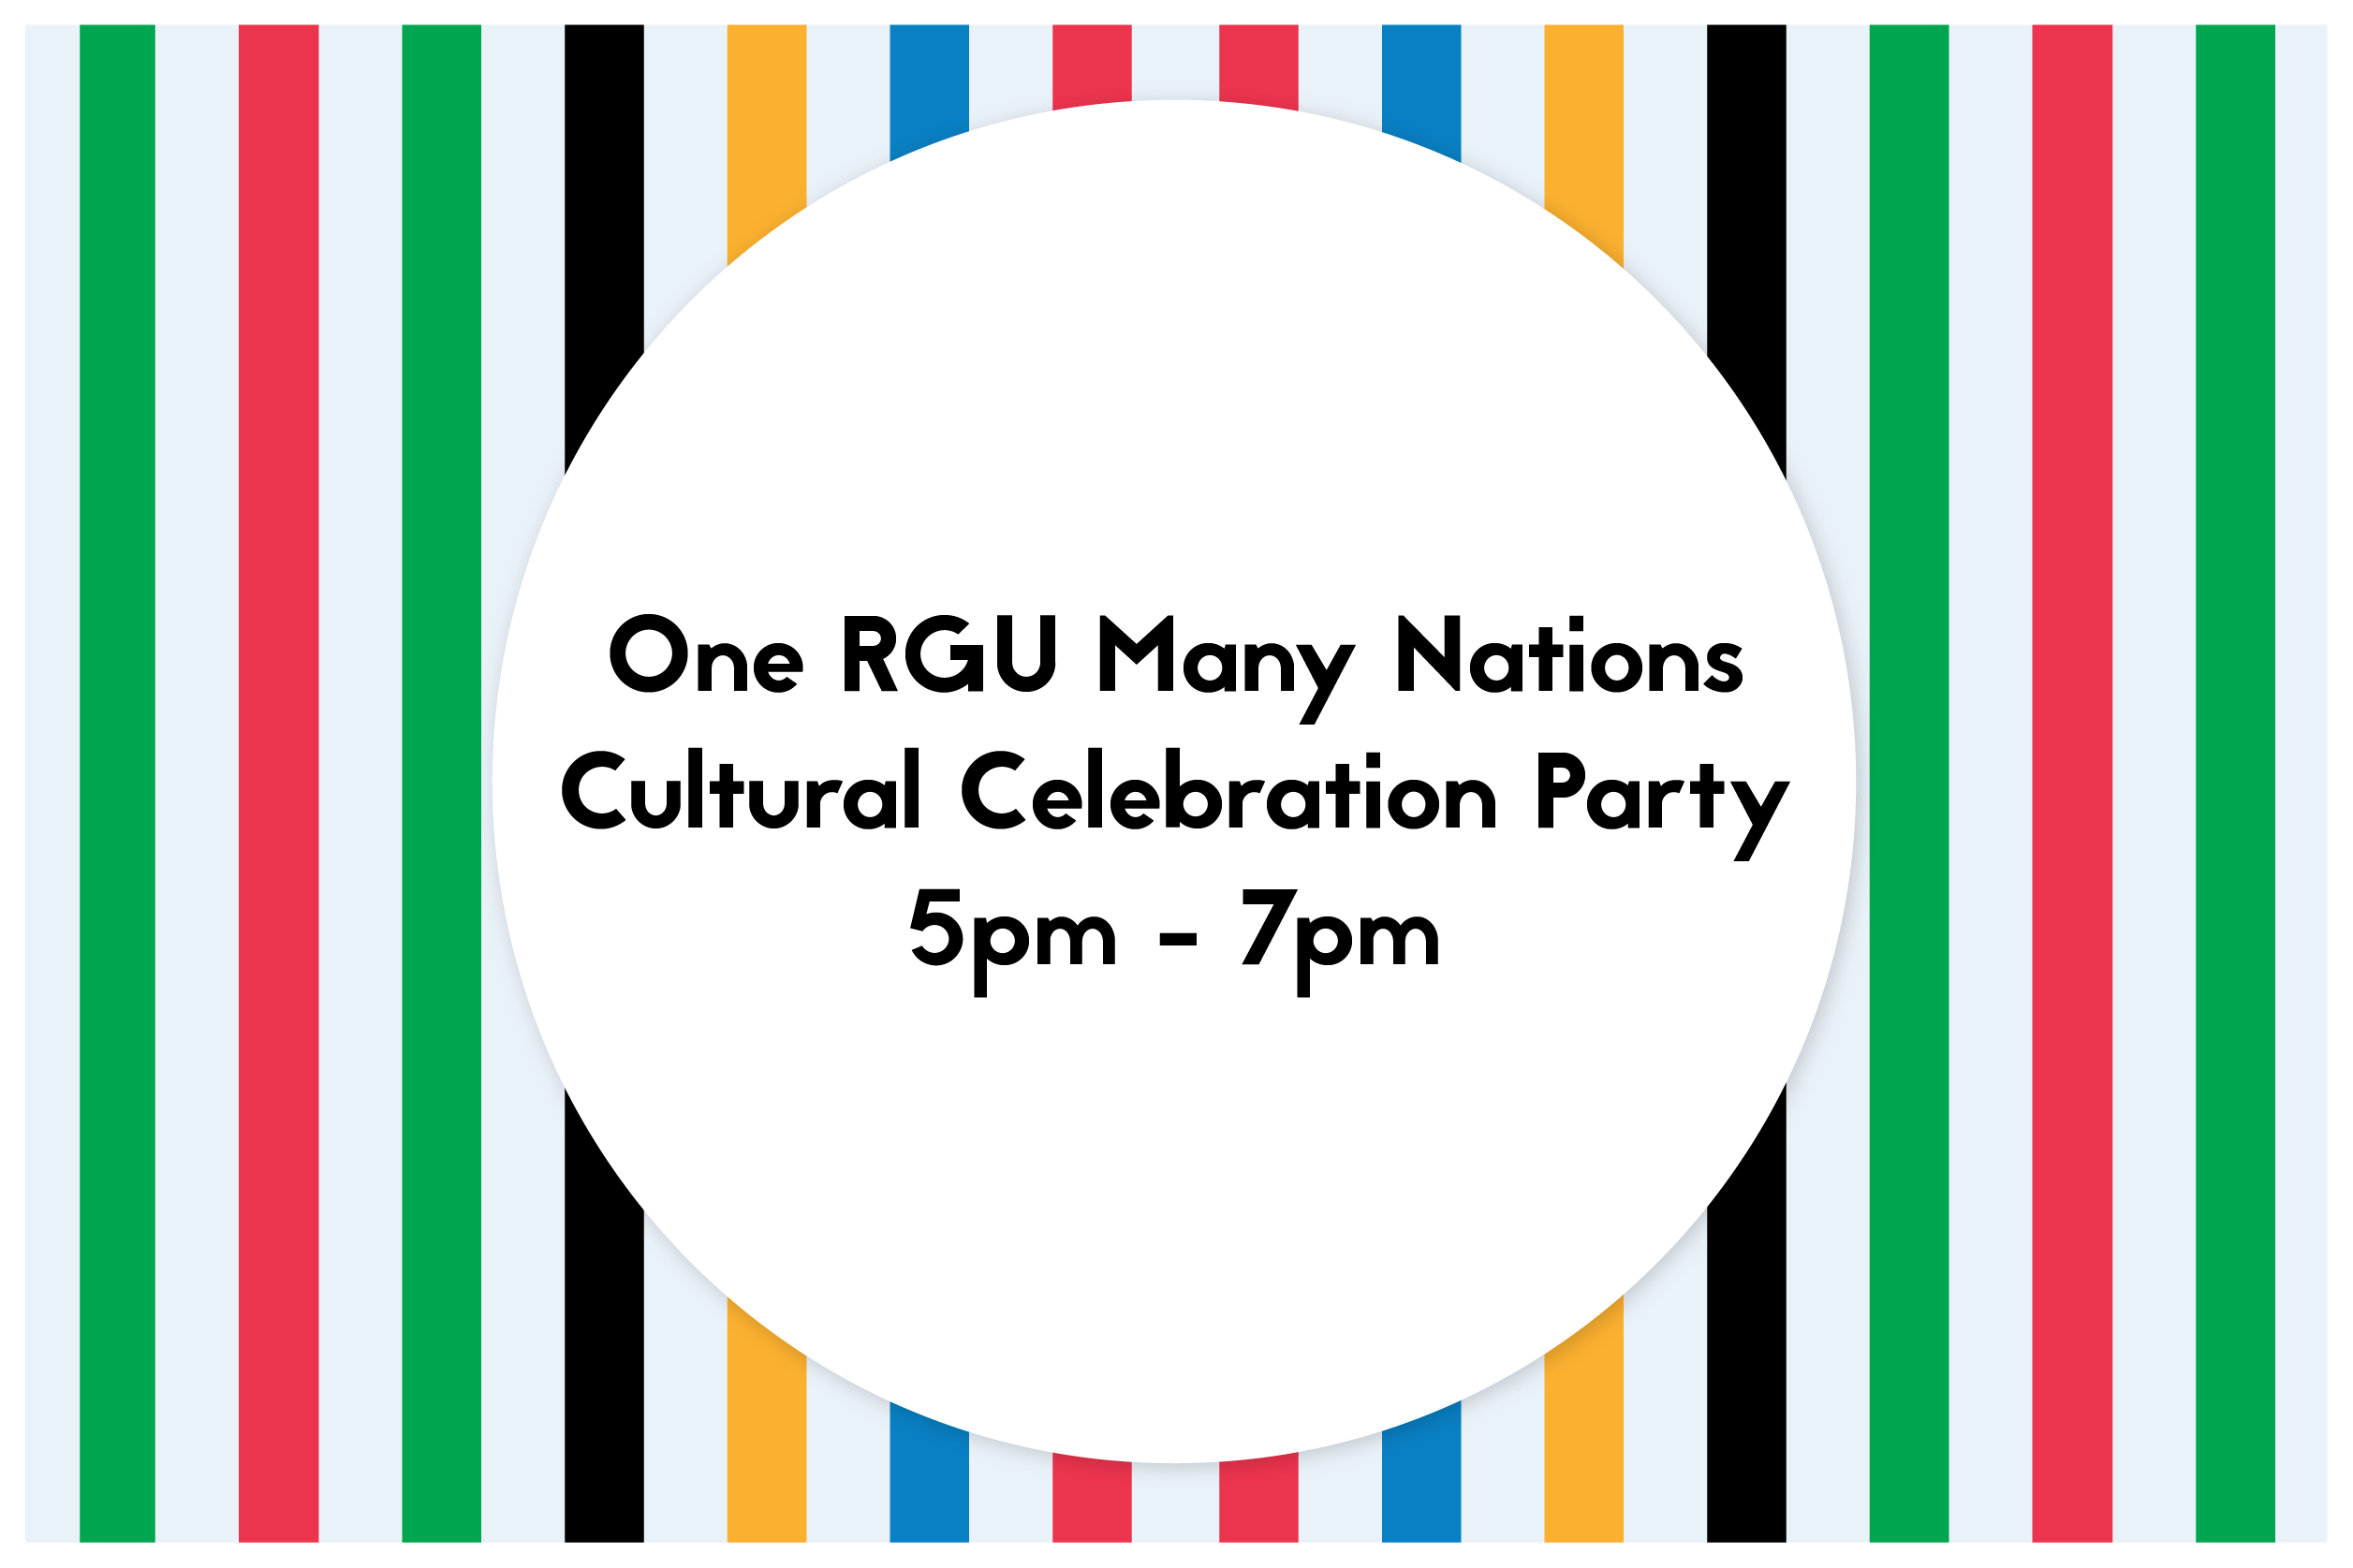 One RGU Many Nations - Cultural Celebration Party